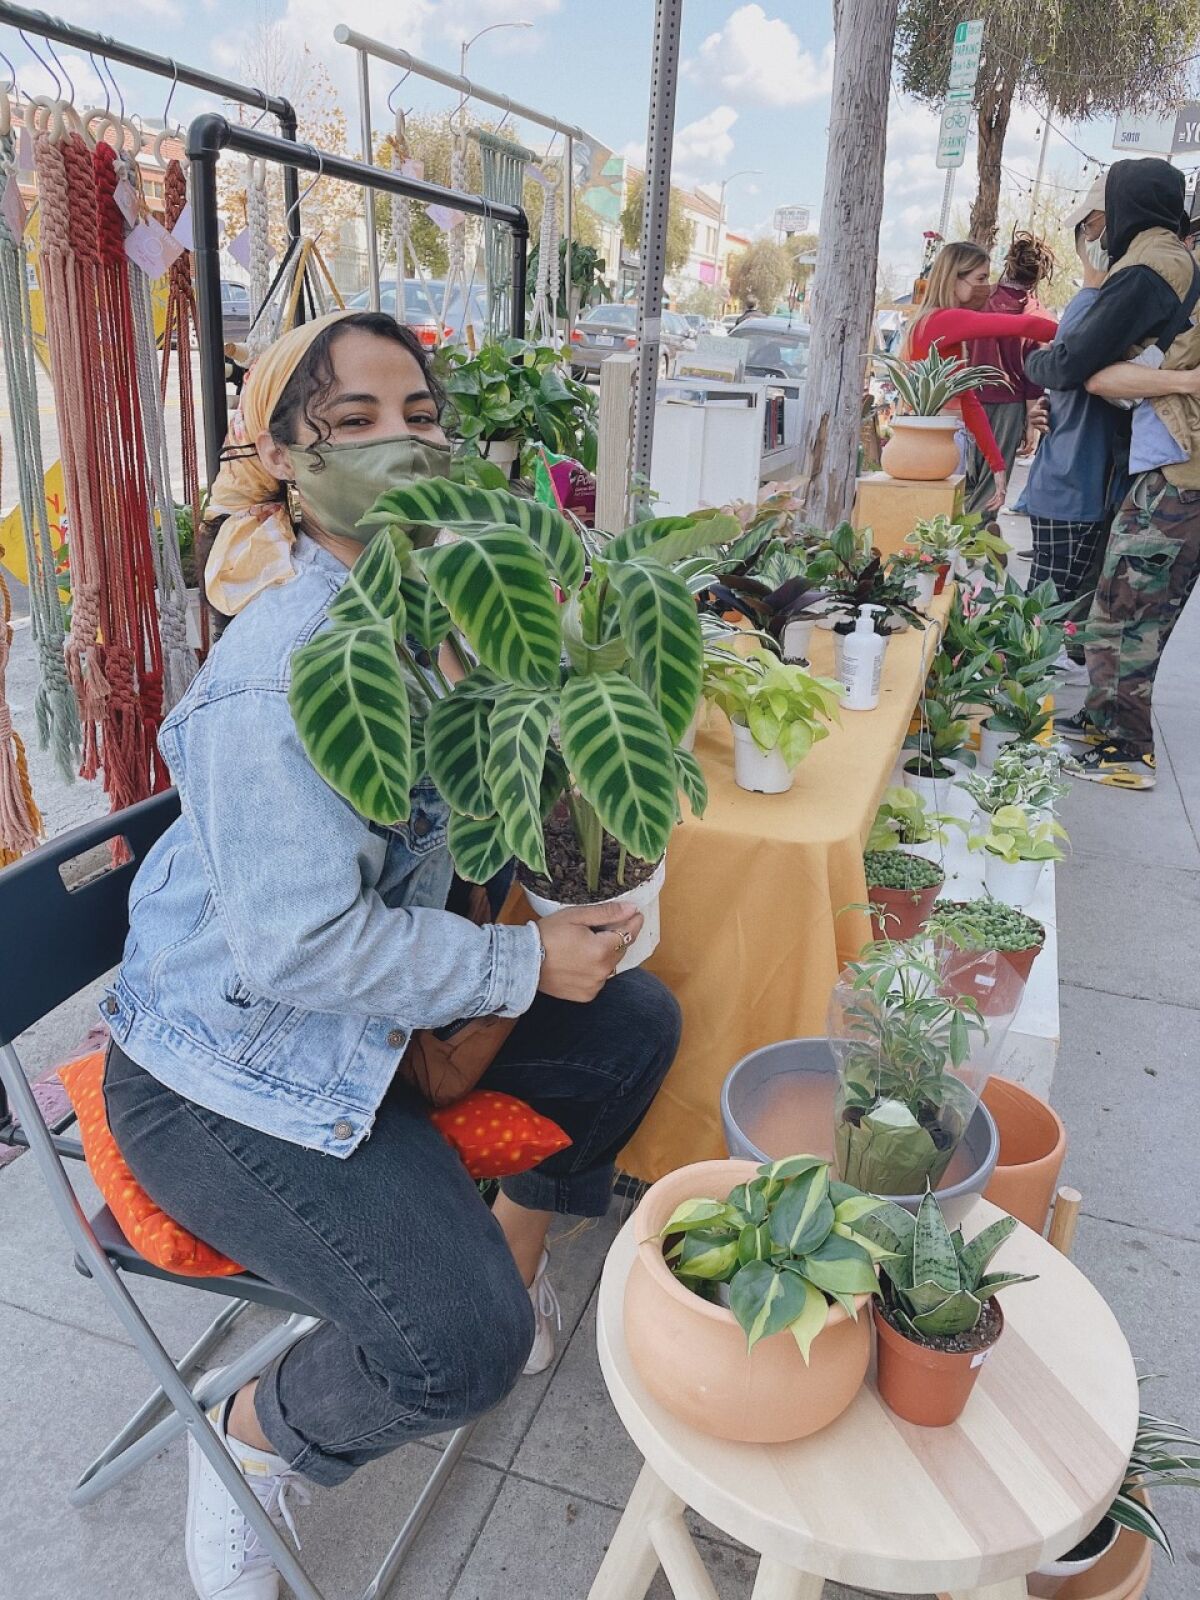 Morales sits behind a selling table covered in plants holding a potted plant.